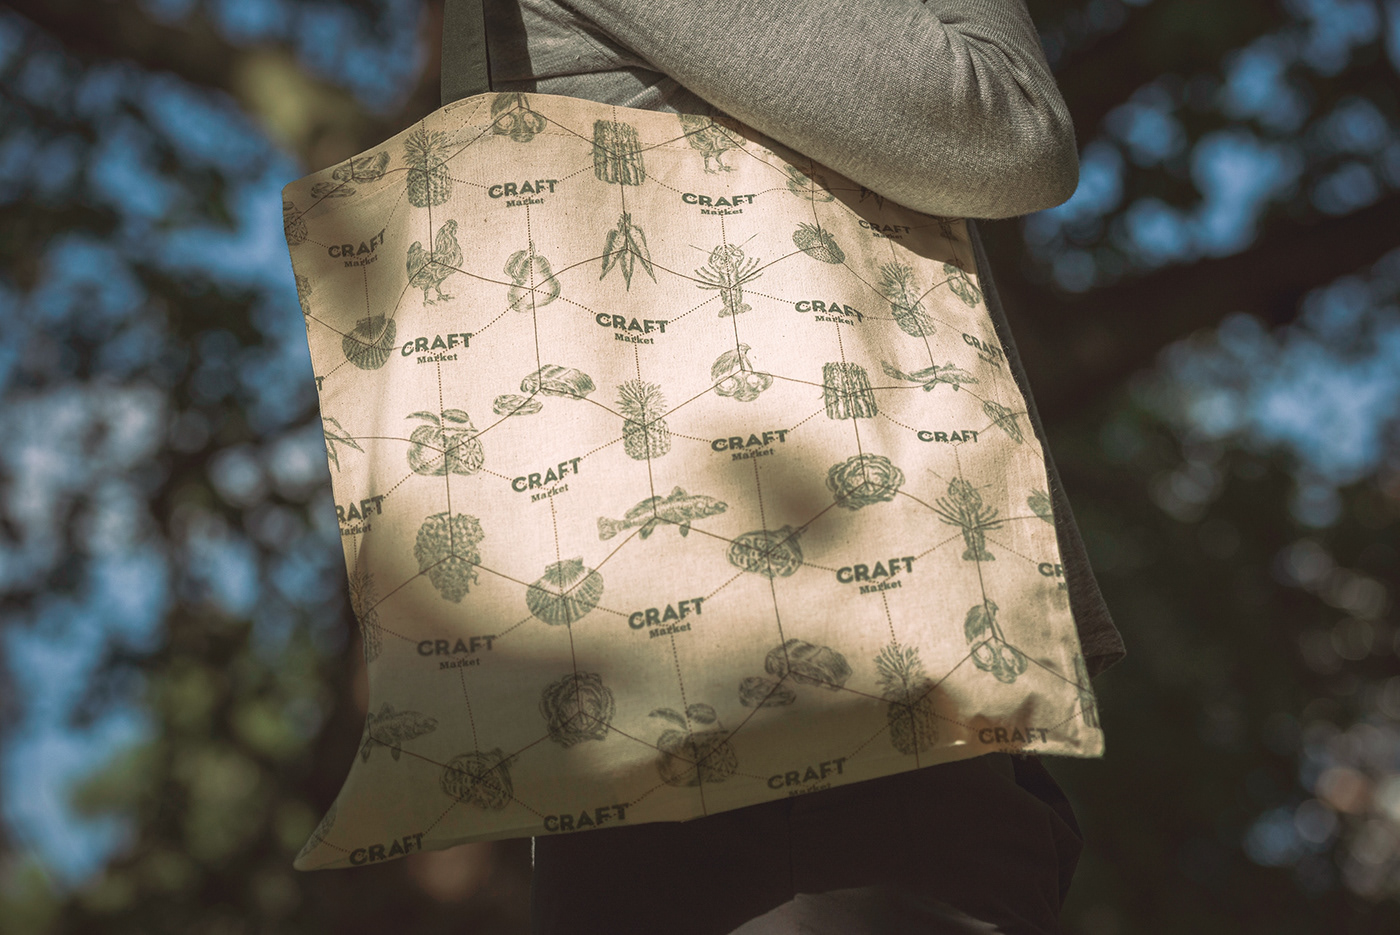 CRAFT Market tote with Toile de Jouy pattern.